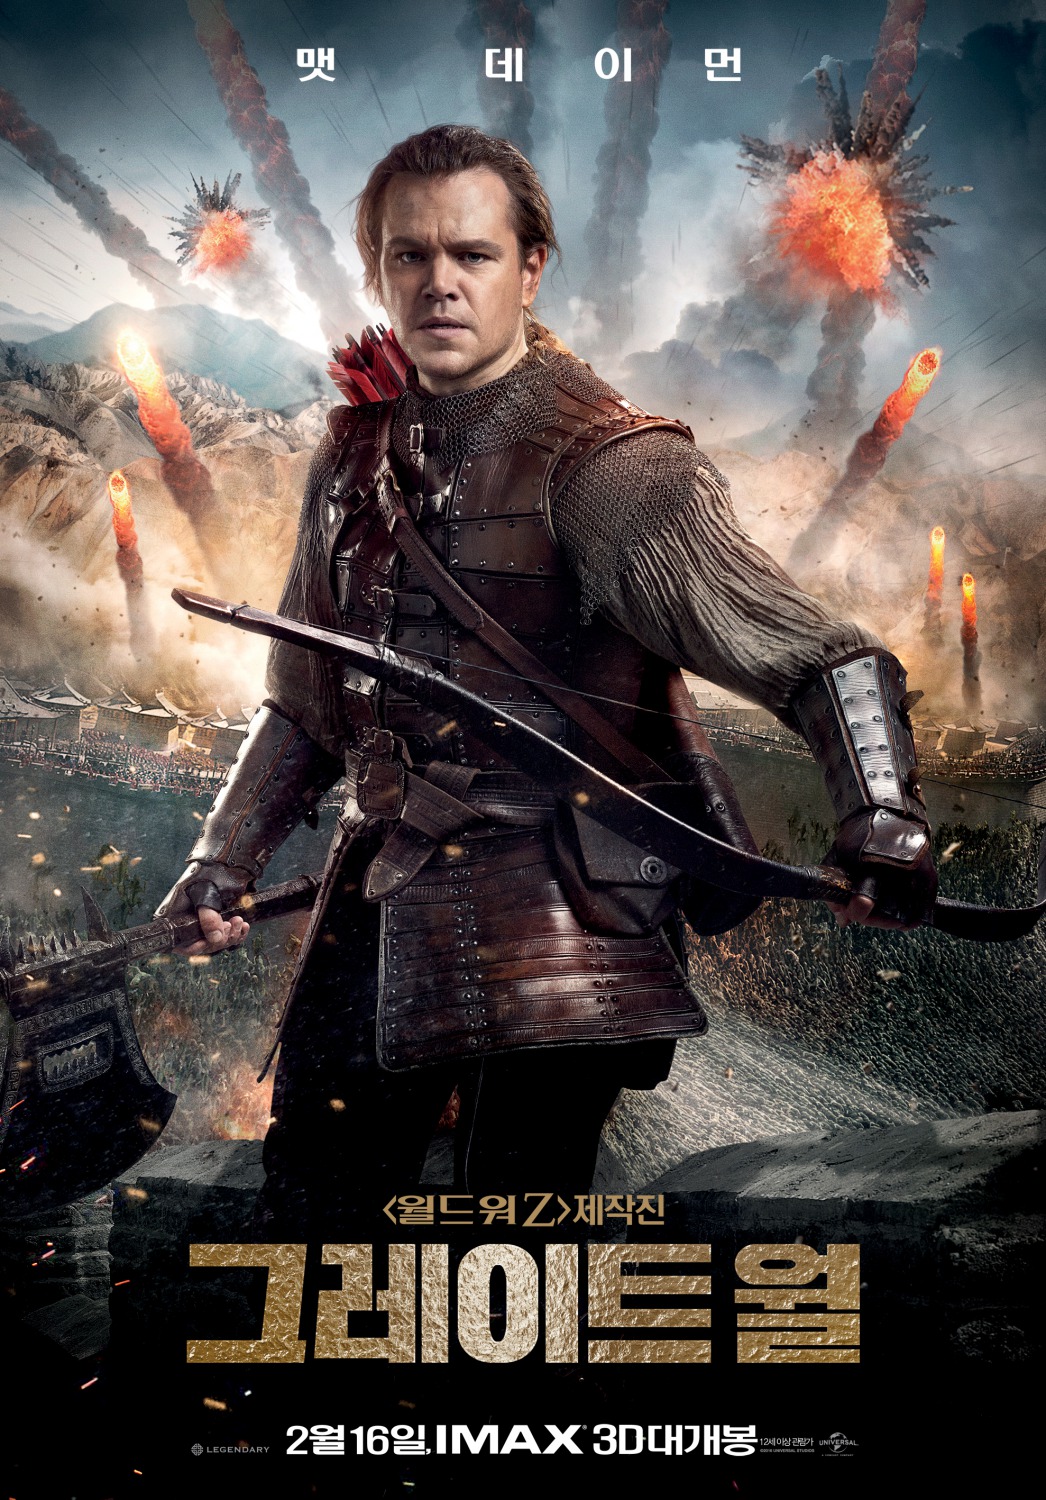 Extra Large Movie Poster Image for The Great Wall (#18 of 21)